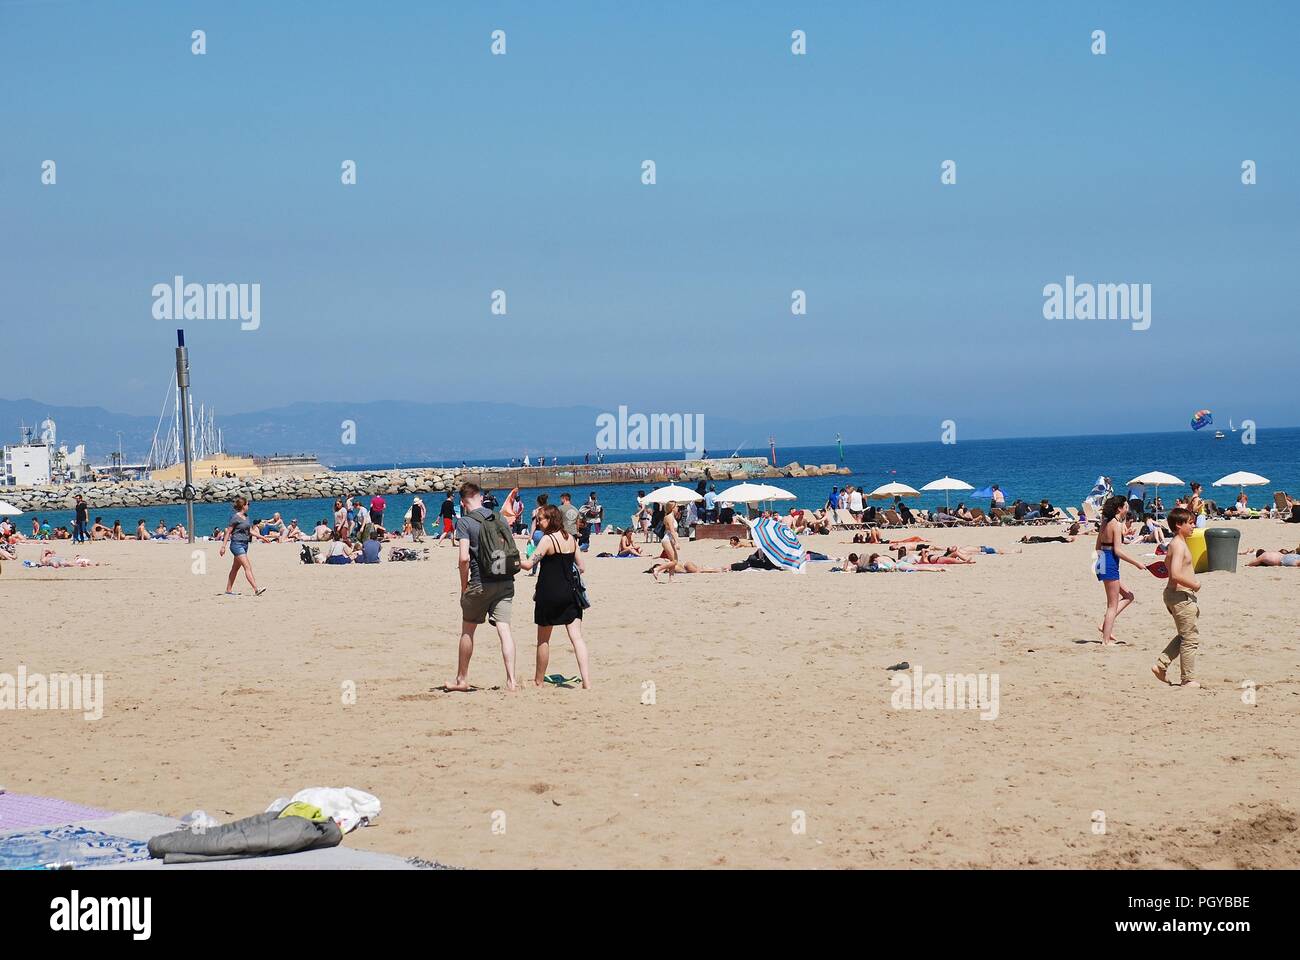 People enjoying the beach at Barcelona in Catalonia, Spain on April 17, 2018. Stock Photo